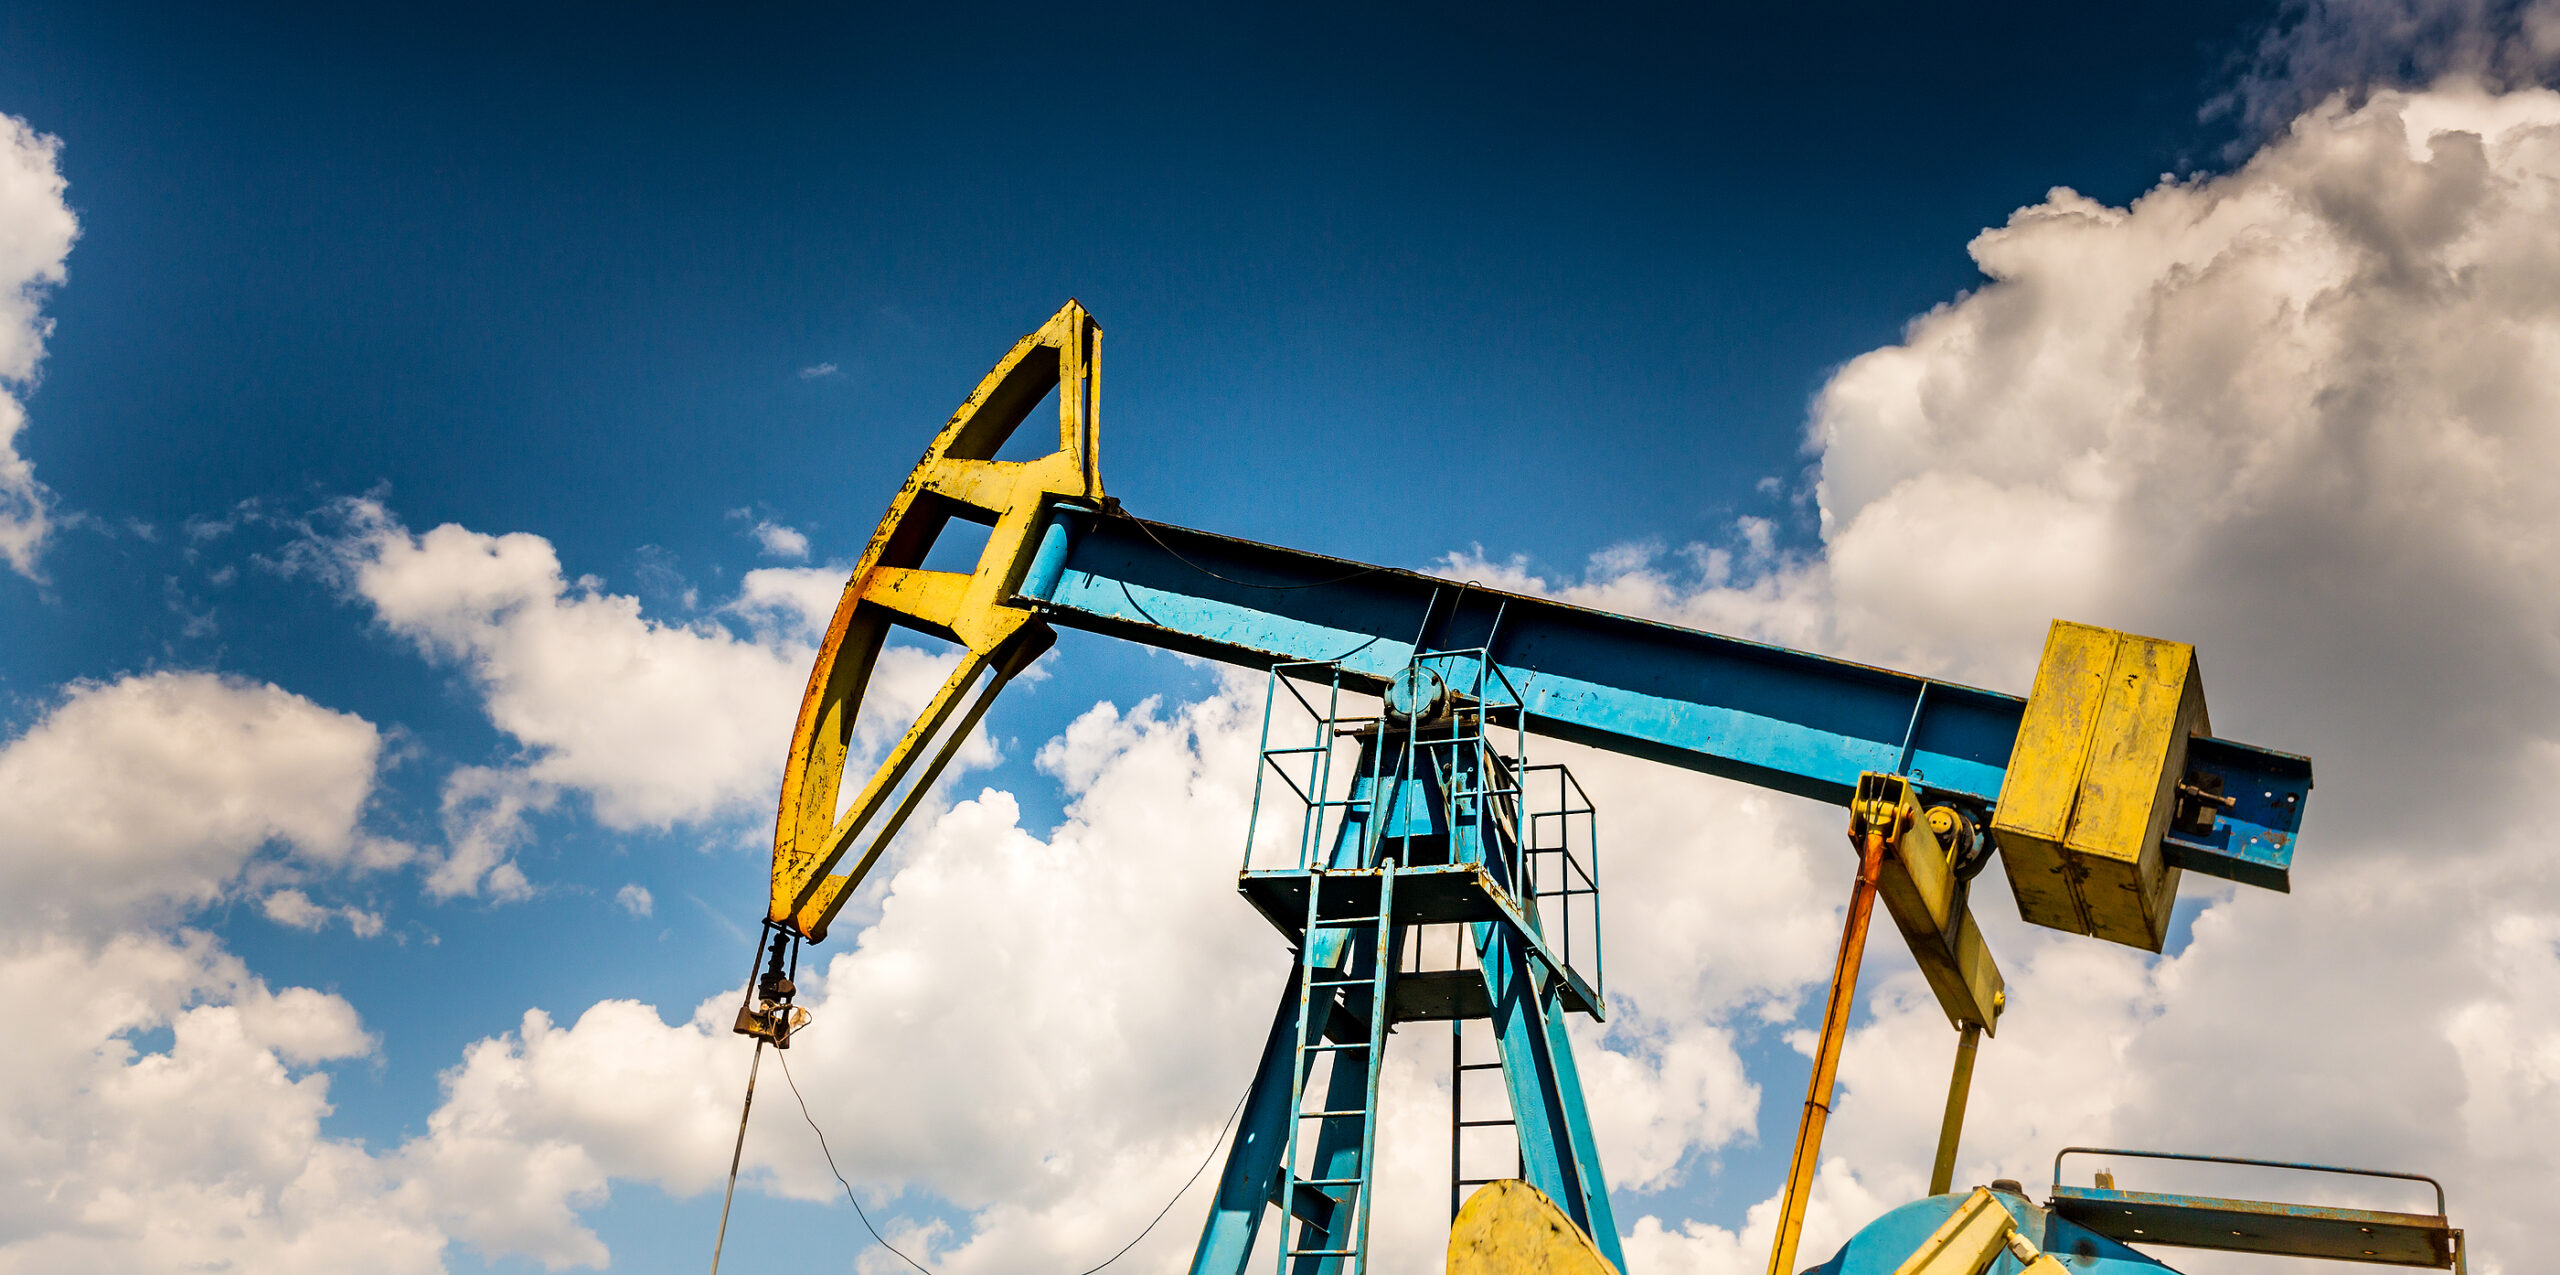 3rd Circuit Finds Insurer Not Liable for Botched Fracking Operation